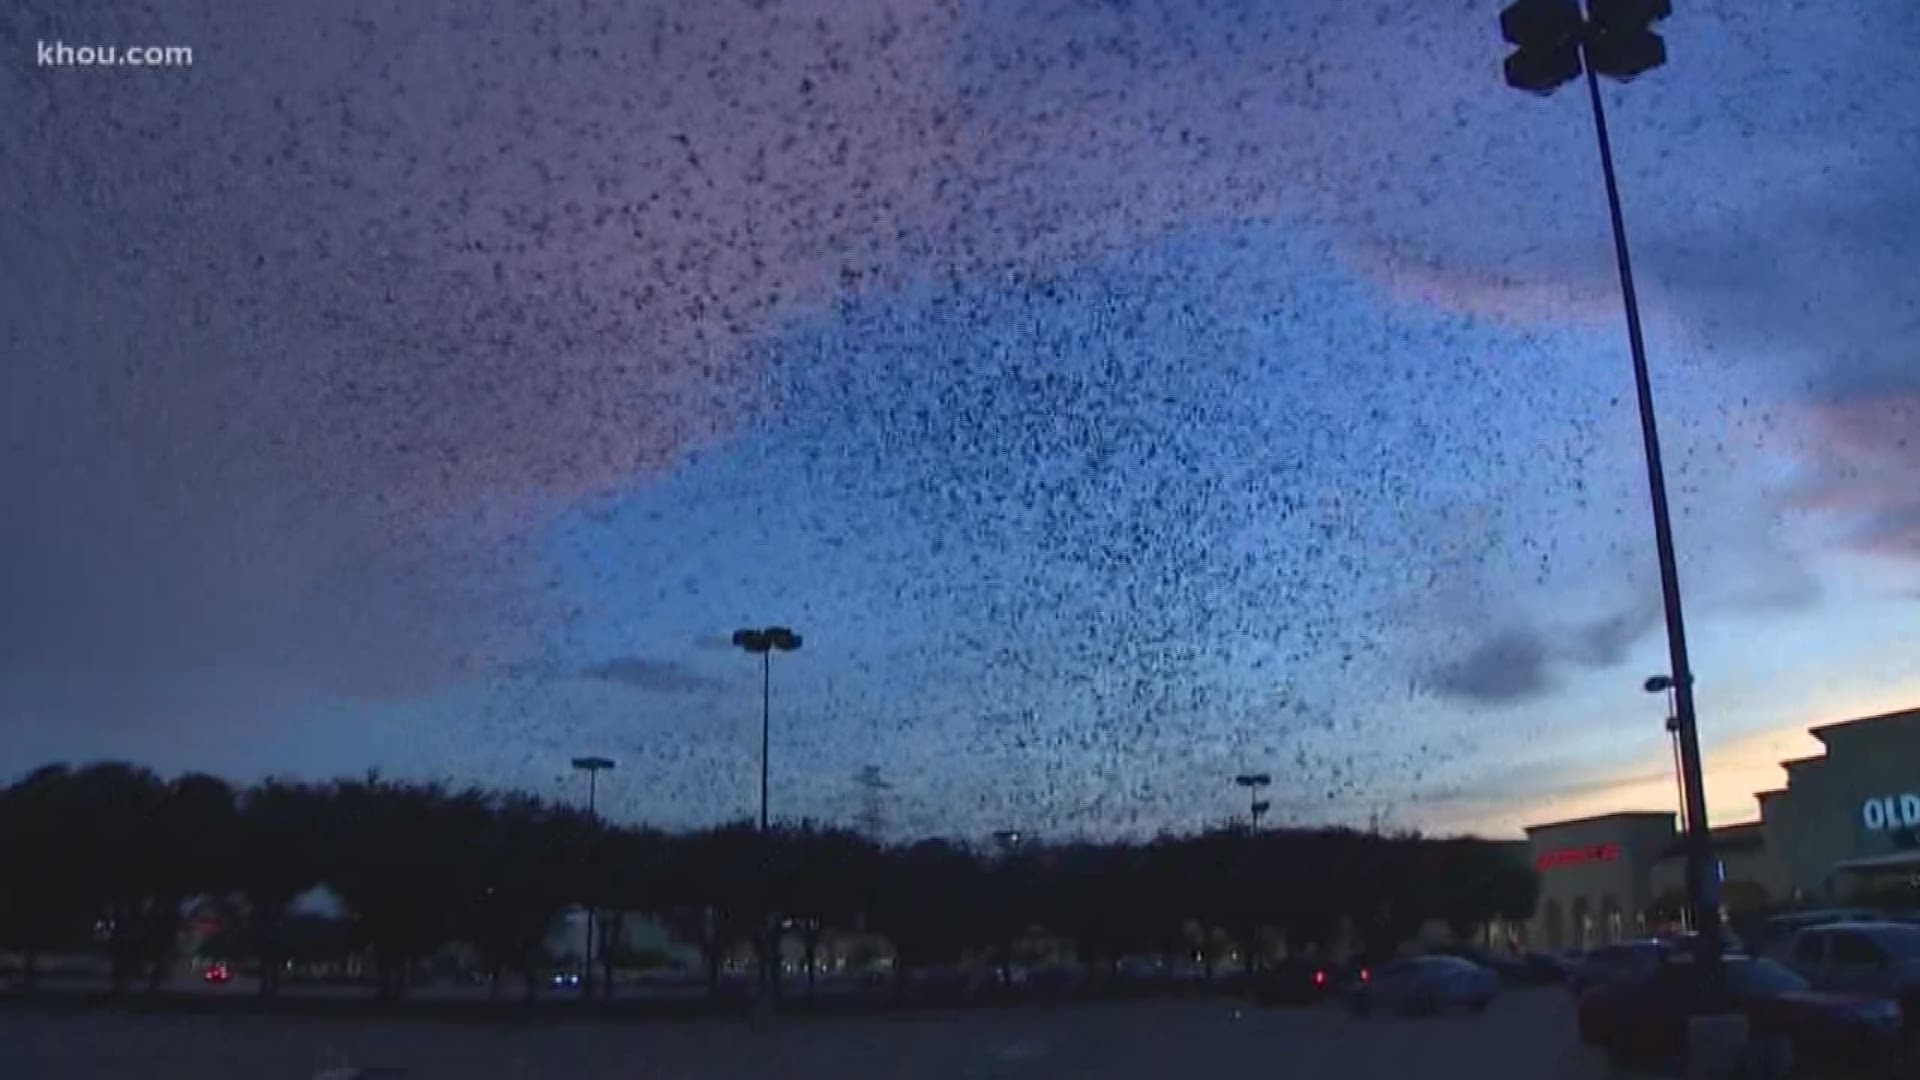 A swarm of purple martins was spotted at the Fountains shopping center in Stafford before they prepare for migration.